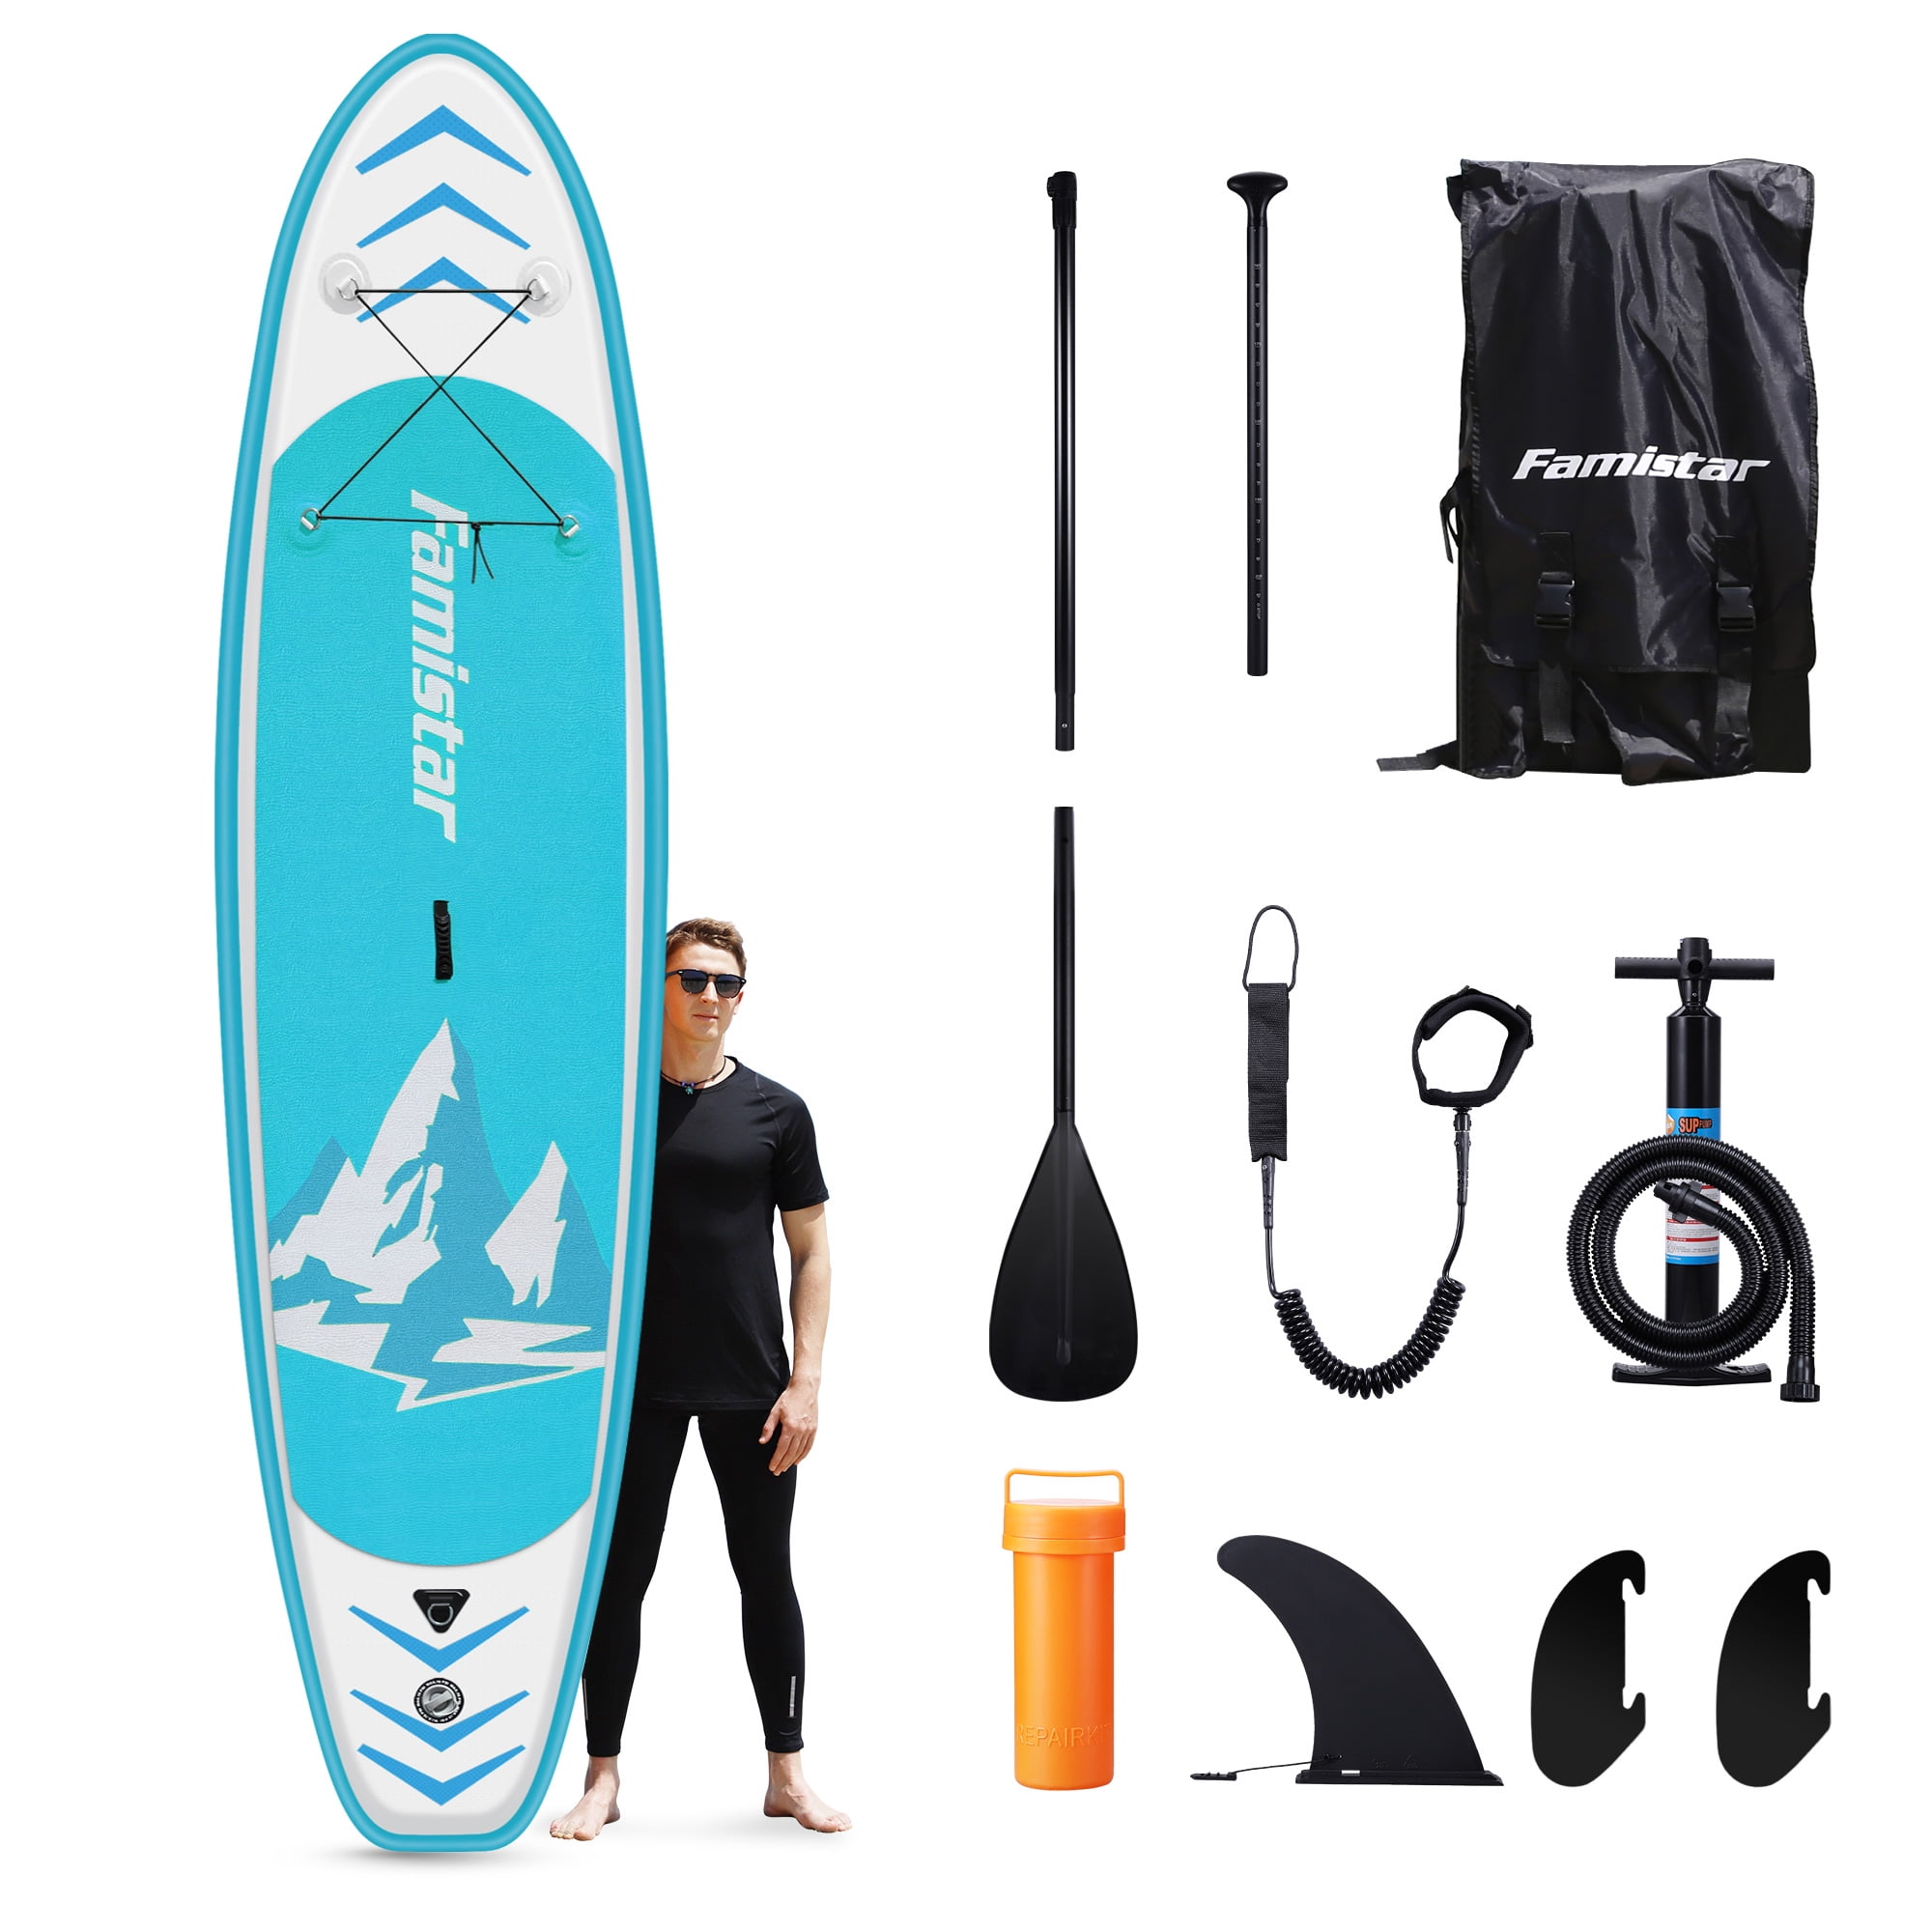 Famistar 12 Ft. Inflatable Stand Up Paddle Board SUP with 3 Fins, Adjustable Paddle, Pump & Carrying Backpack